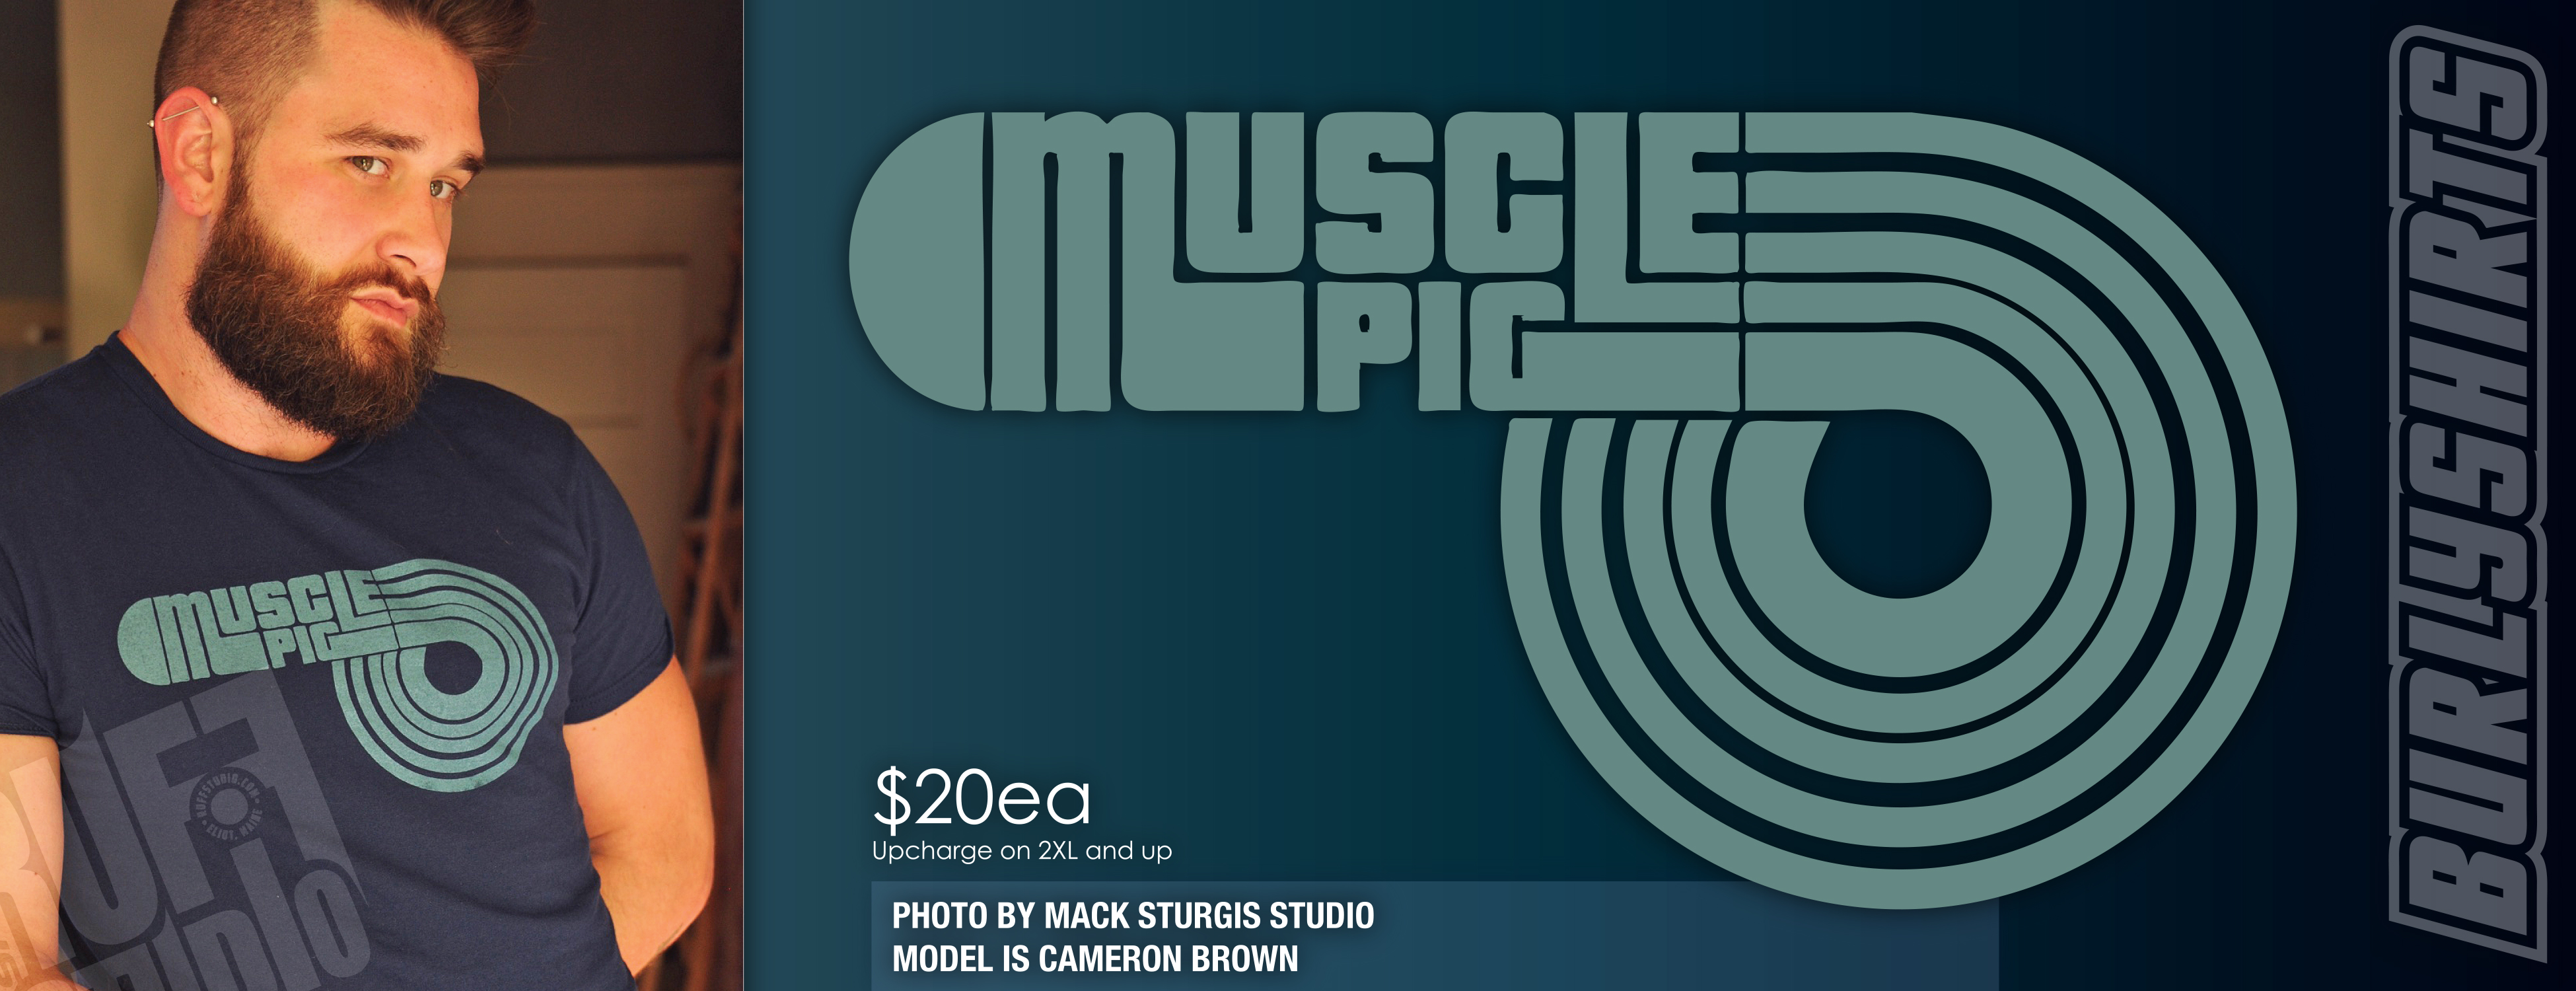 muscle-pig-ad1a.jpg